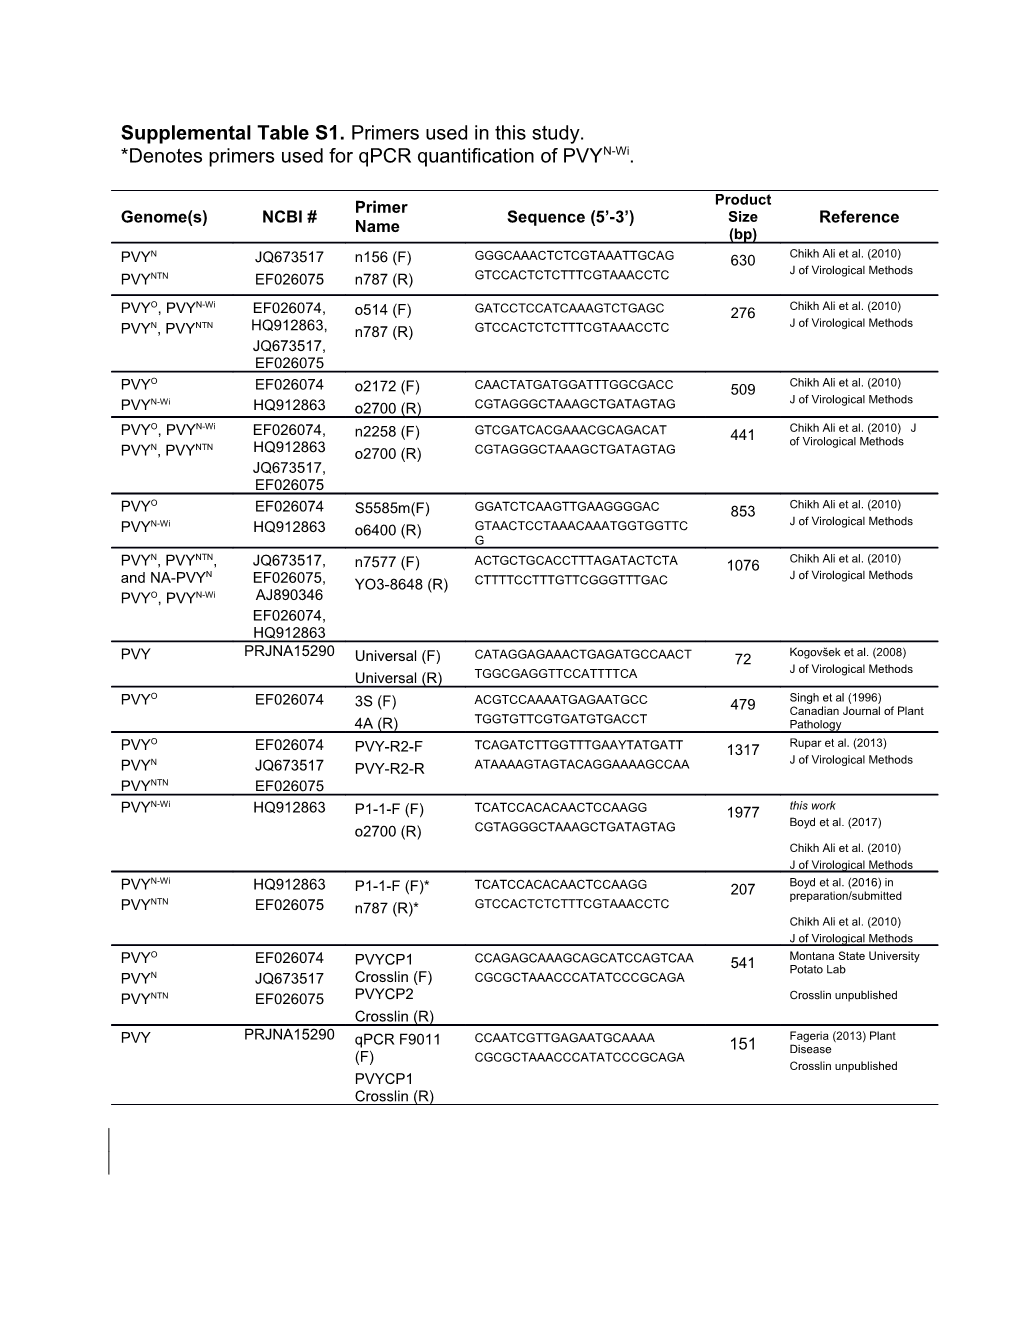 Supplemental Table S1. Primers Used in This Study